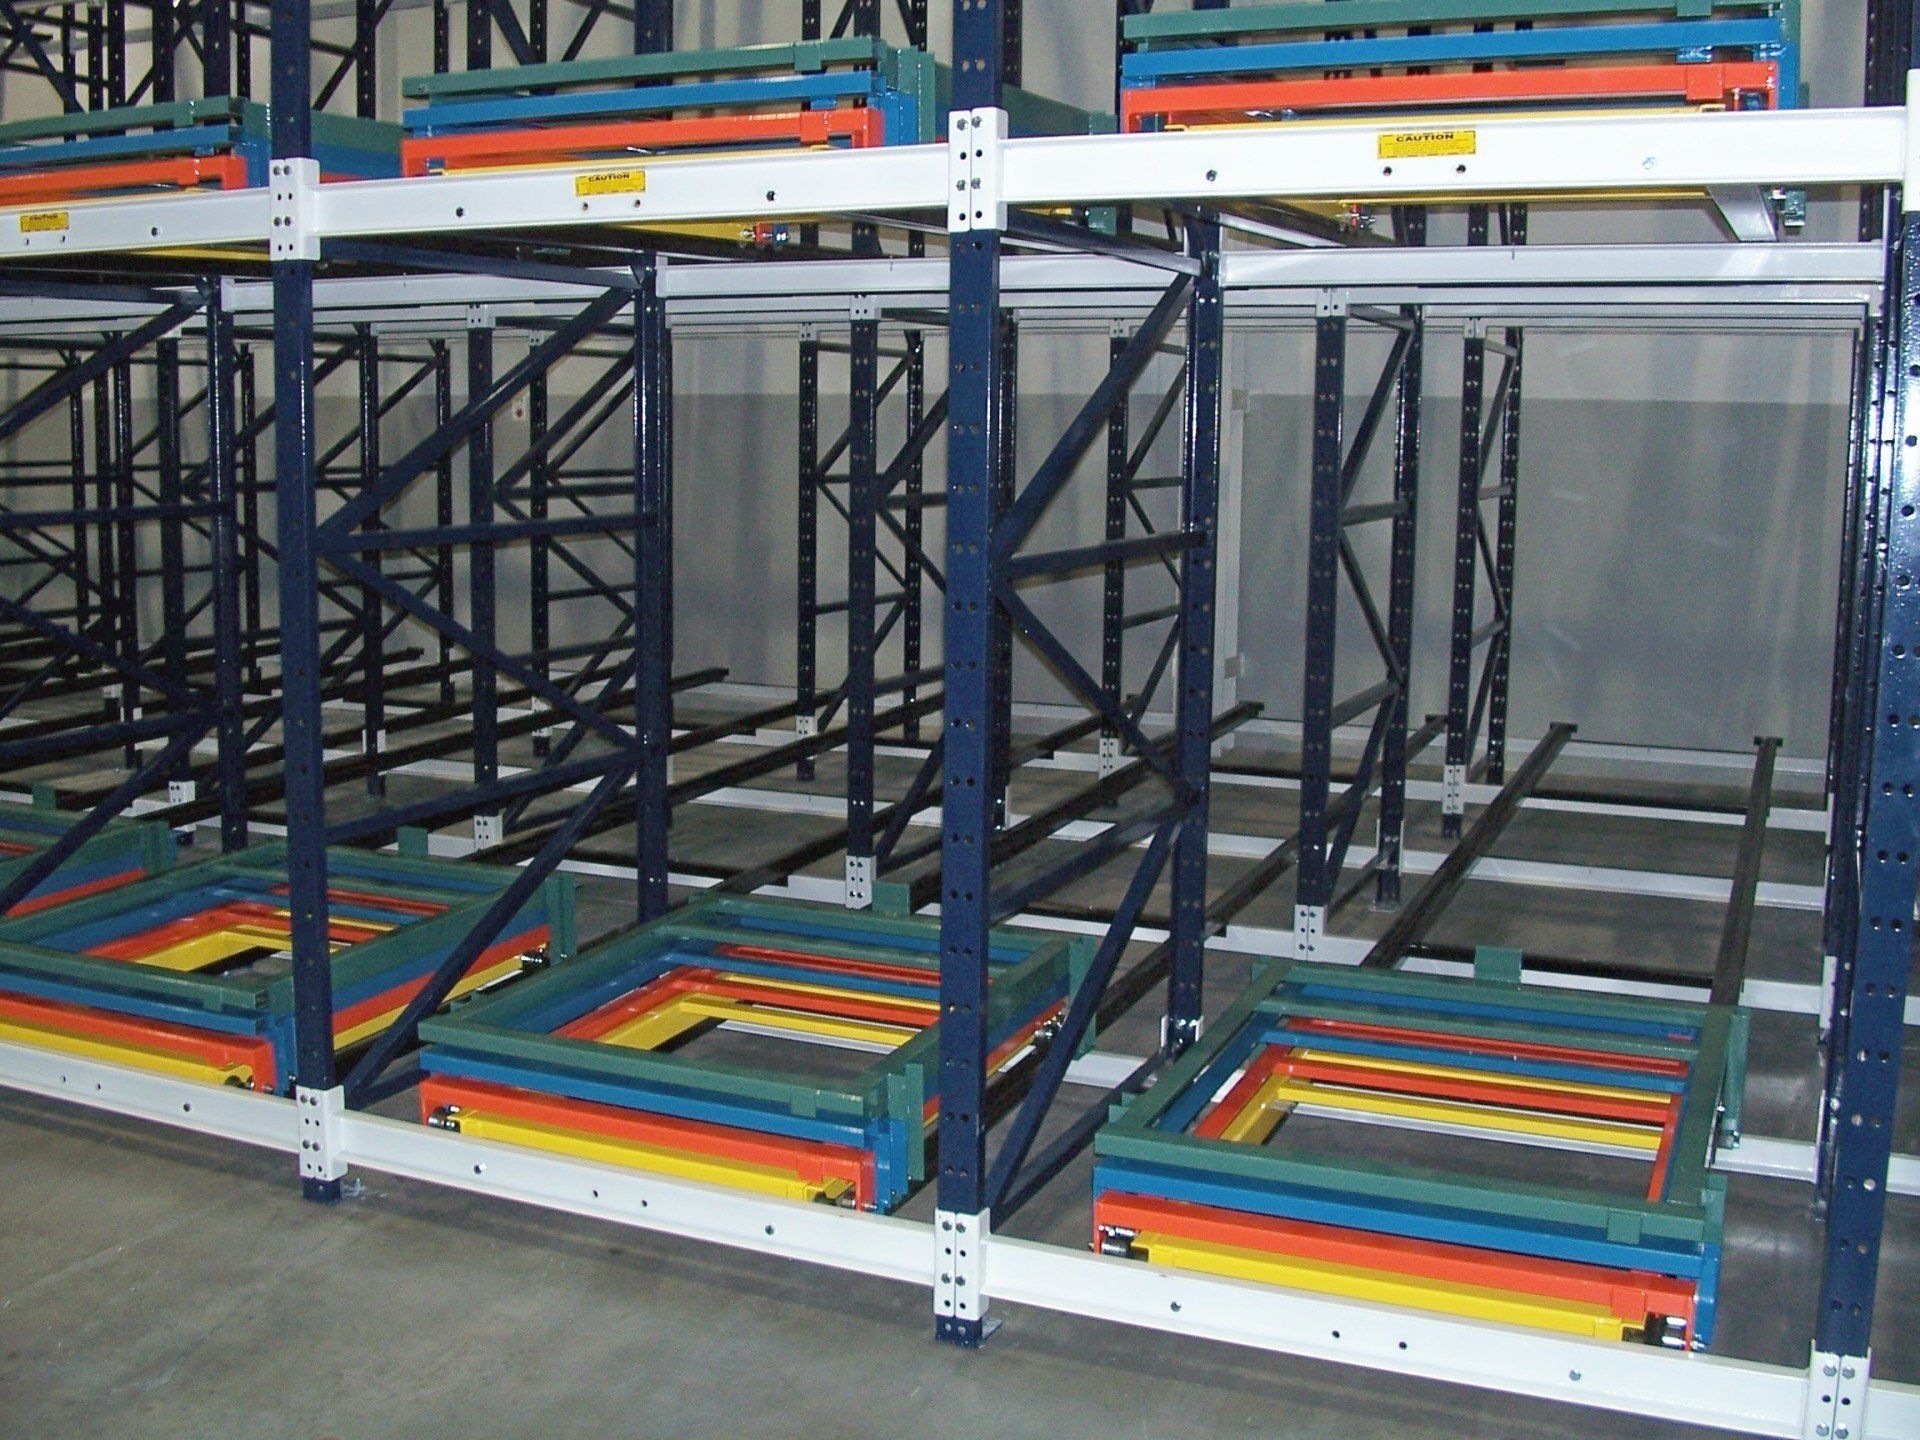 Heavy duty Push back pallet rack system for storing 5 pallets deep